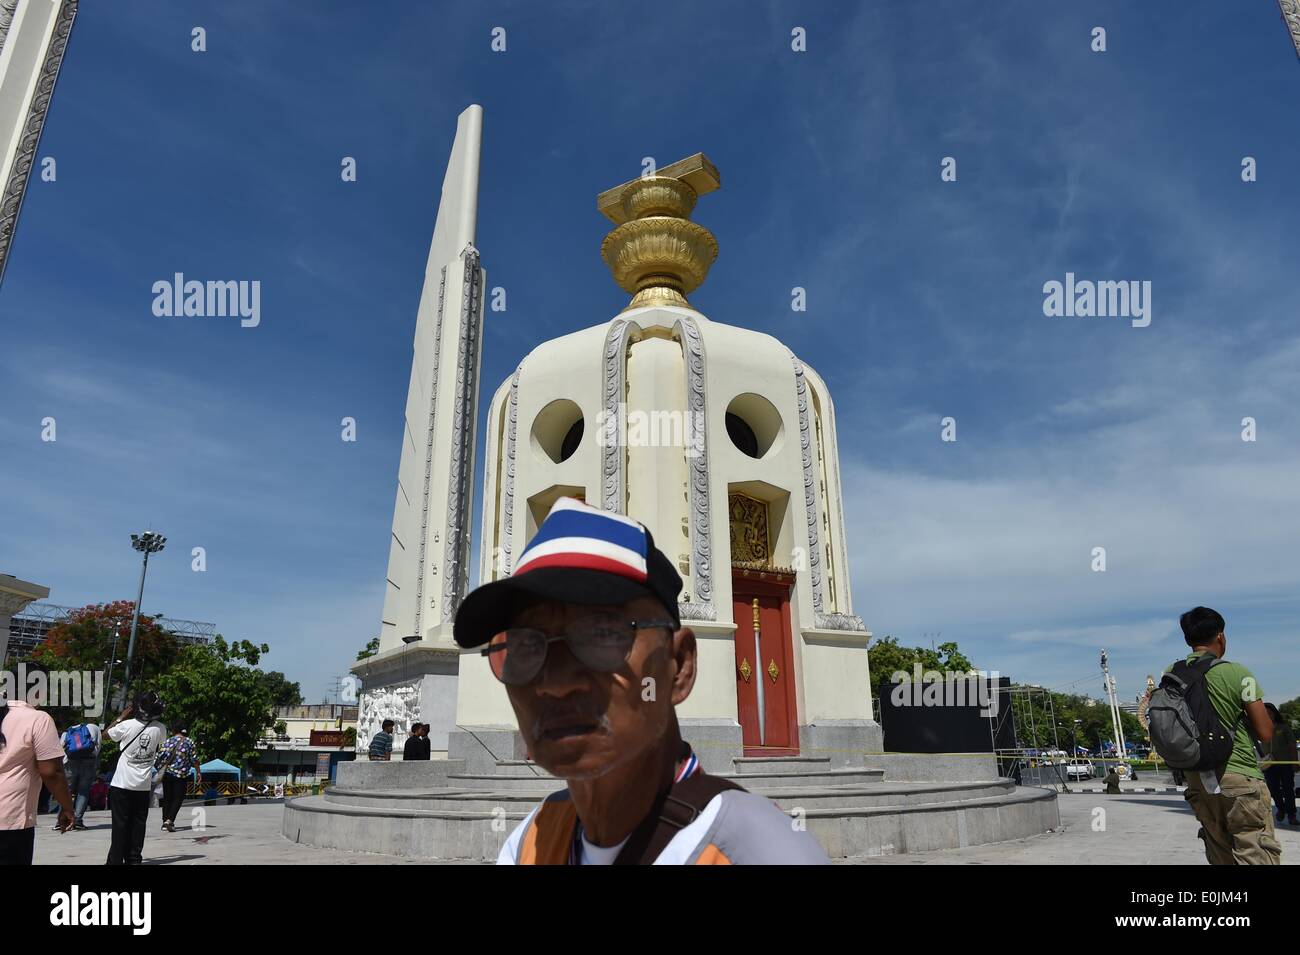 Bangkok, Thailand. 15th May, 2014. A man walks past the site of an attack near the Democracy Monument in Bangkok, Thailand, May 15, 2014. Two anti-government protestors were killed and 22 others injured in a gun and grenade attack here early Thursday, local media reported. © Lui Siu Wai/Xinhua/Alamy Live News Stock Photo